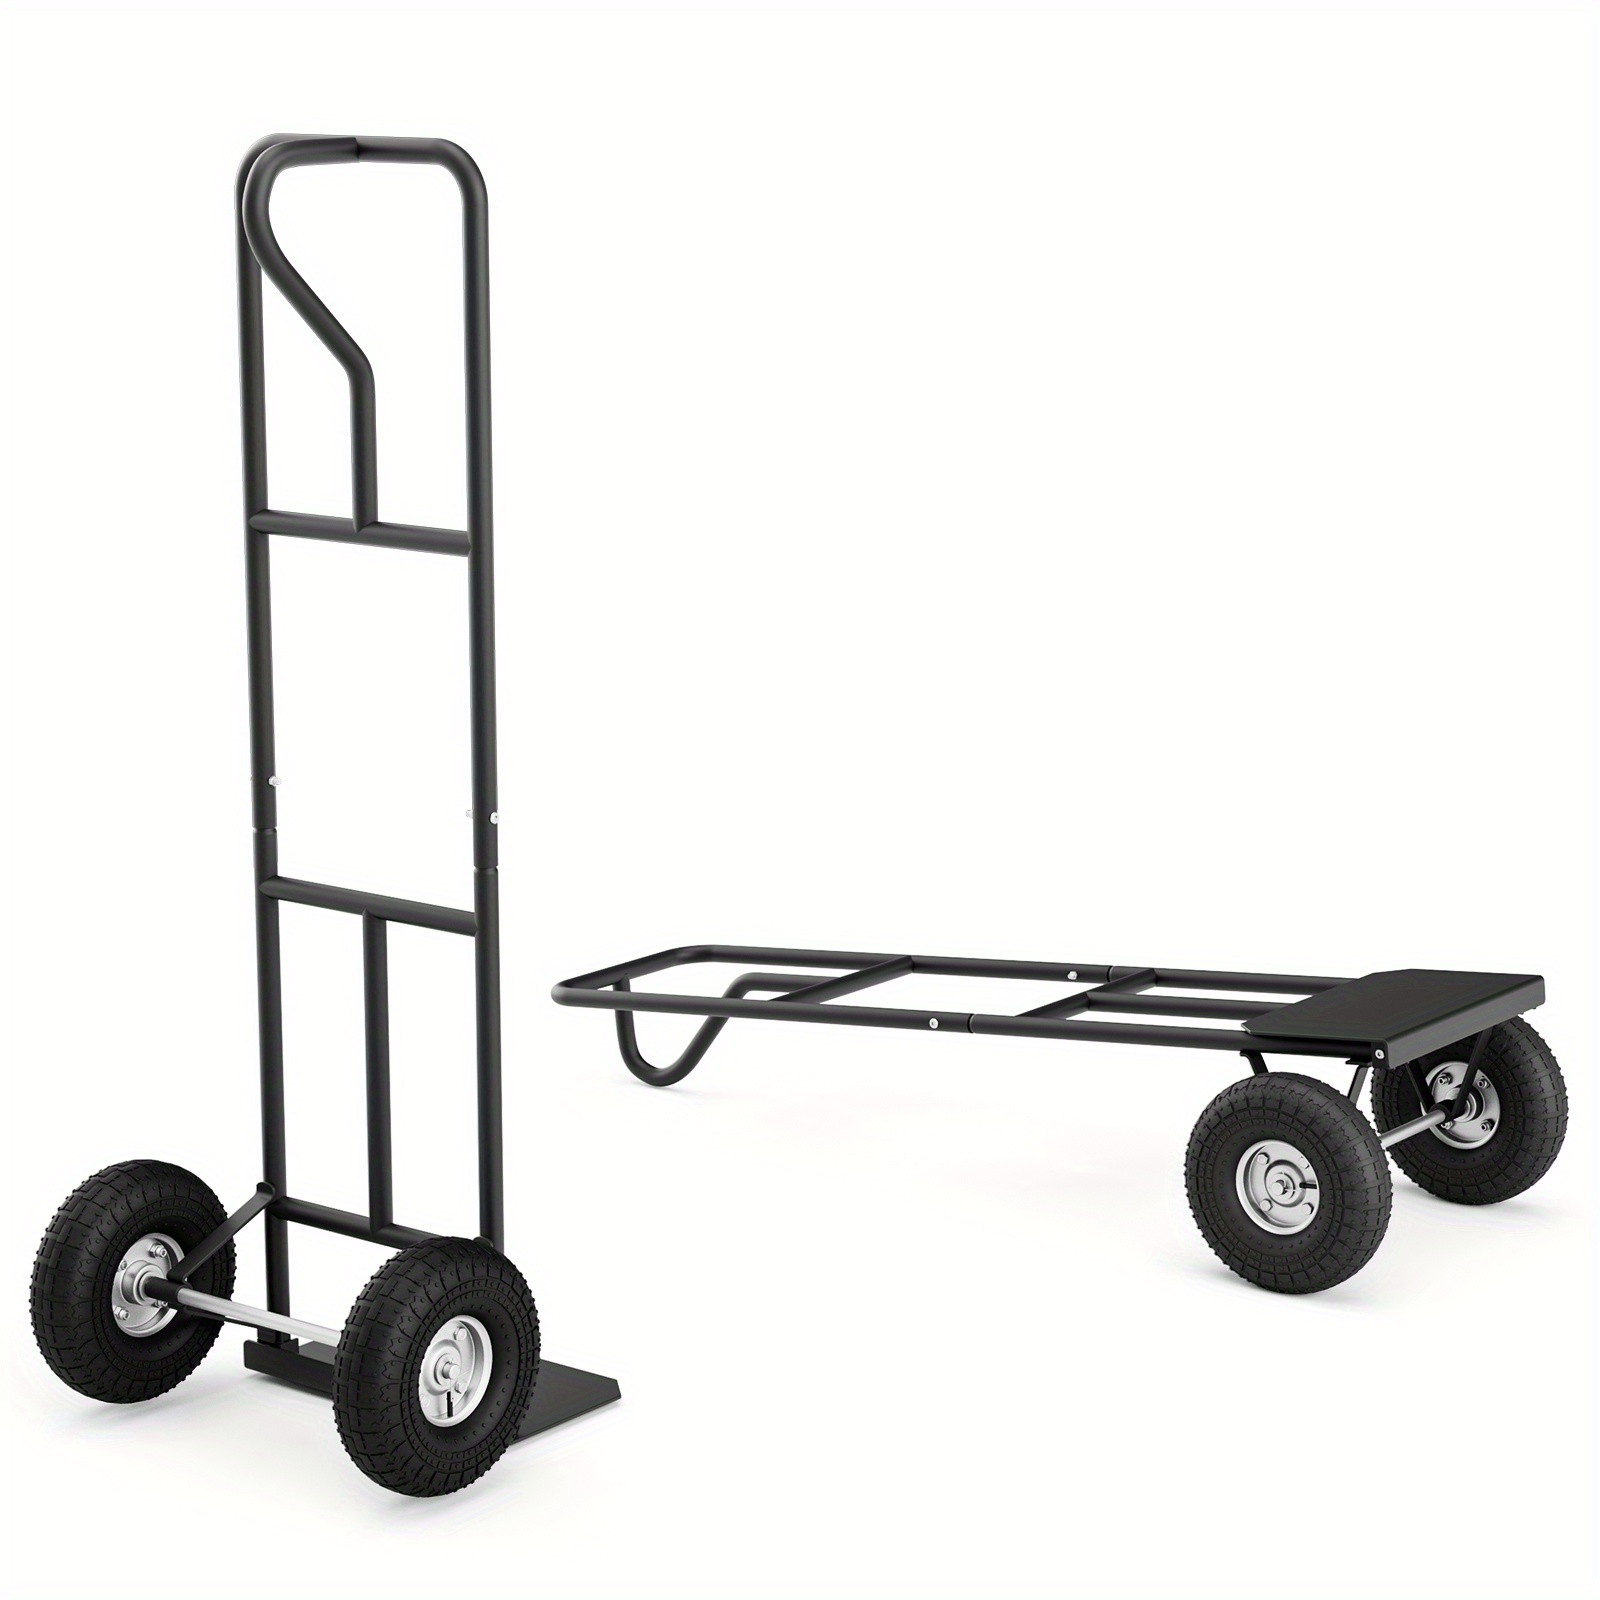 

Lifezeal Heavy Duty Hand Truck 660lbs Capacity Trolley Cart W/ Foldable Nose Plate Black